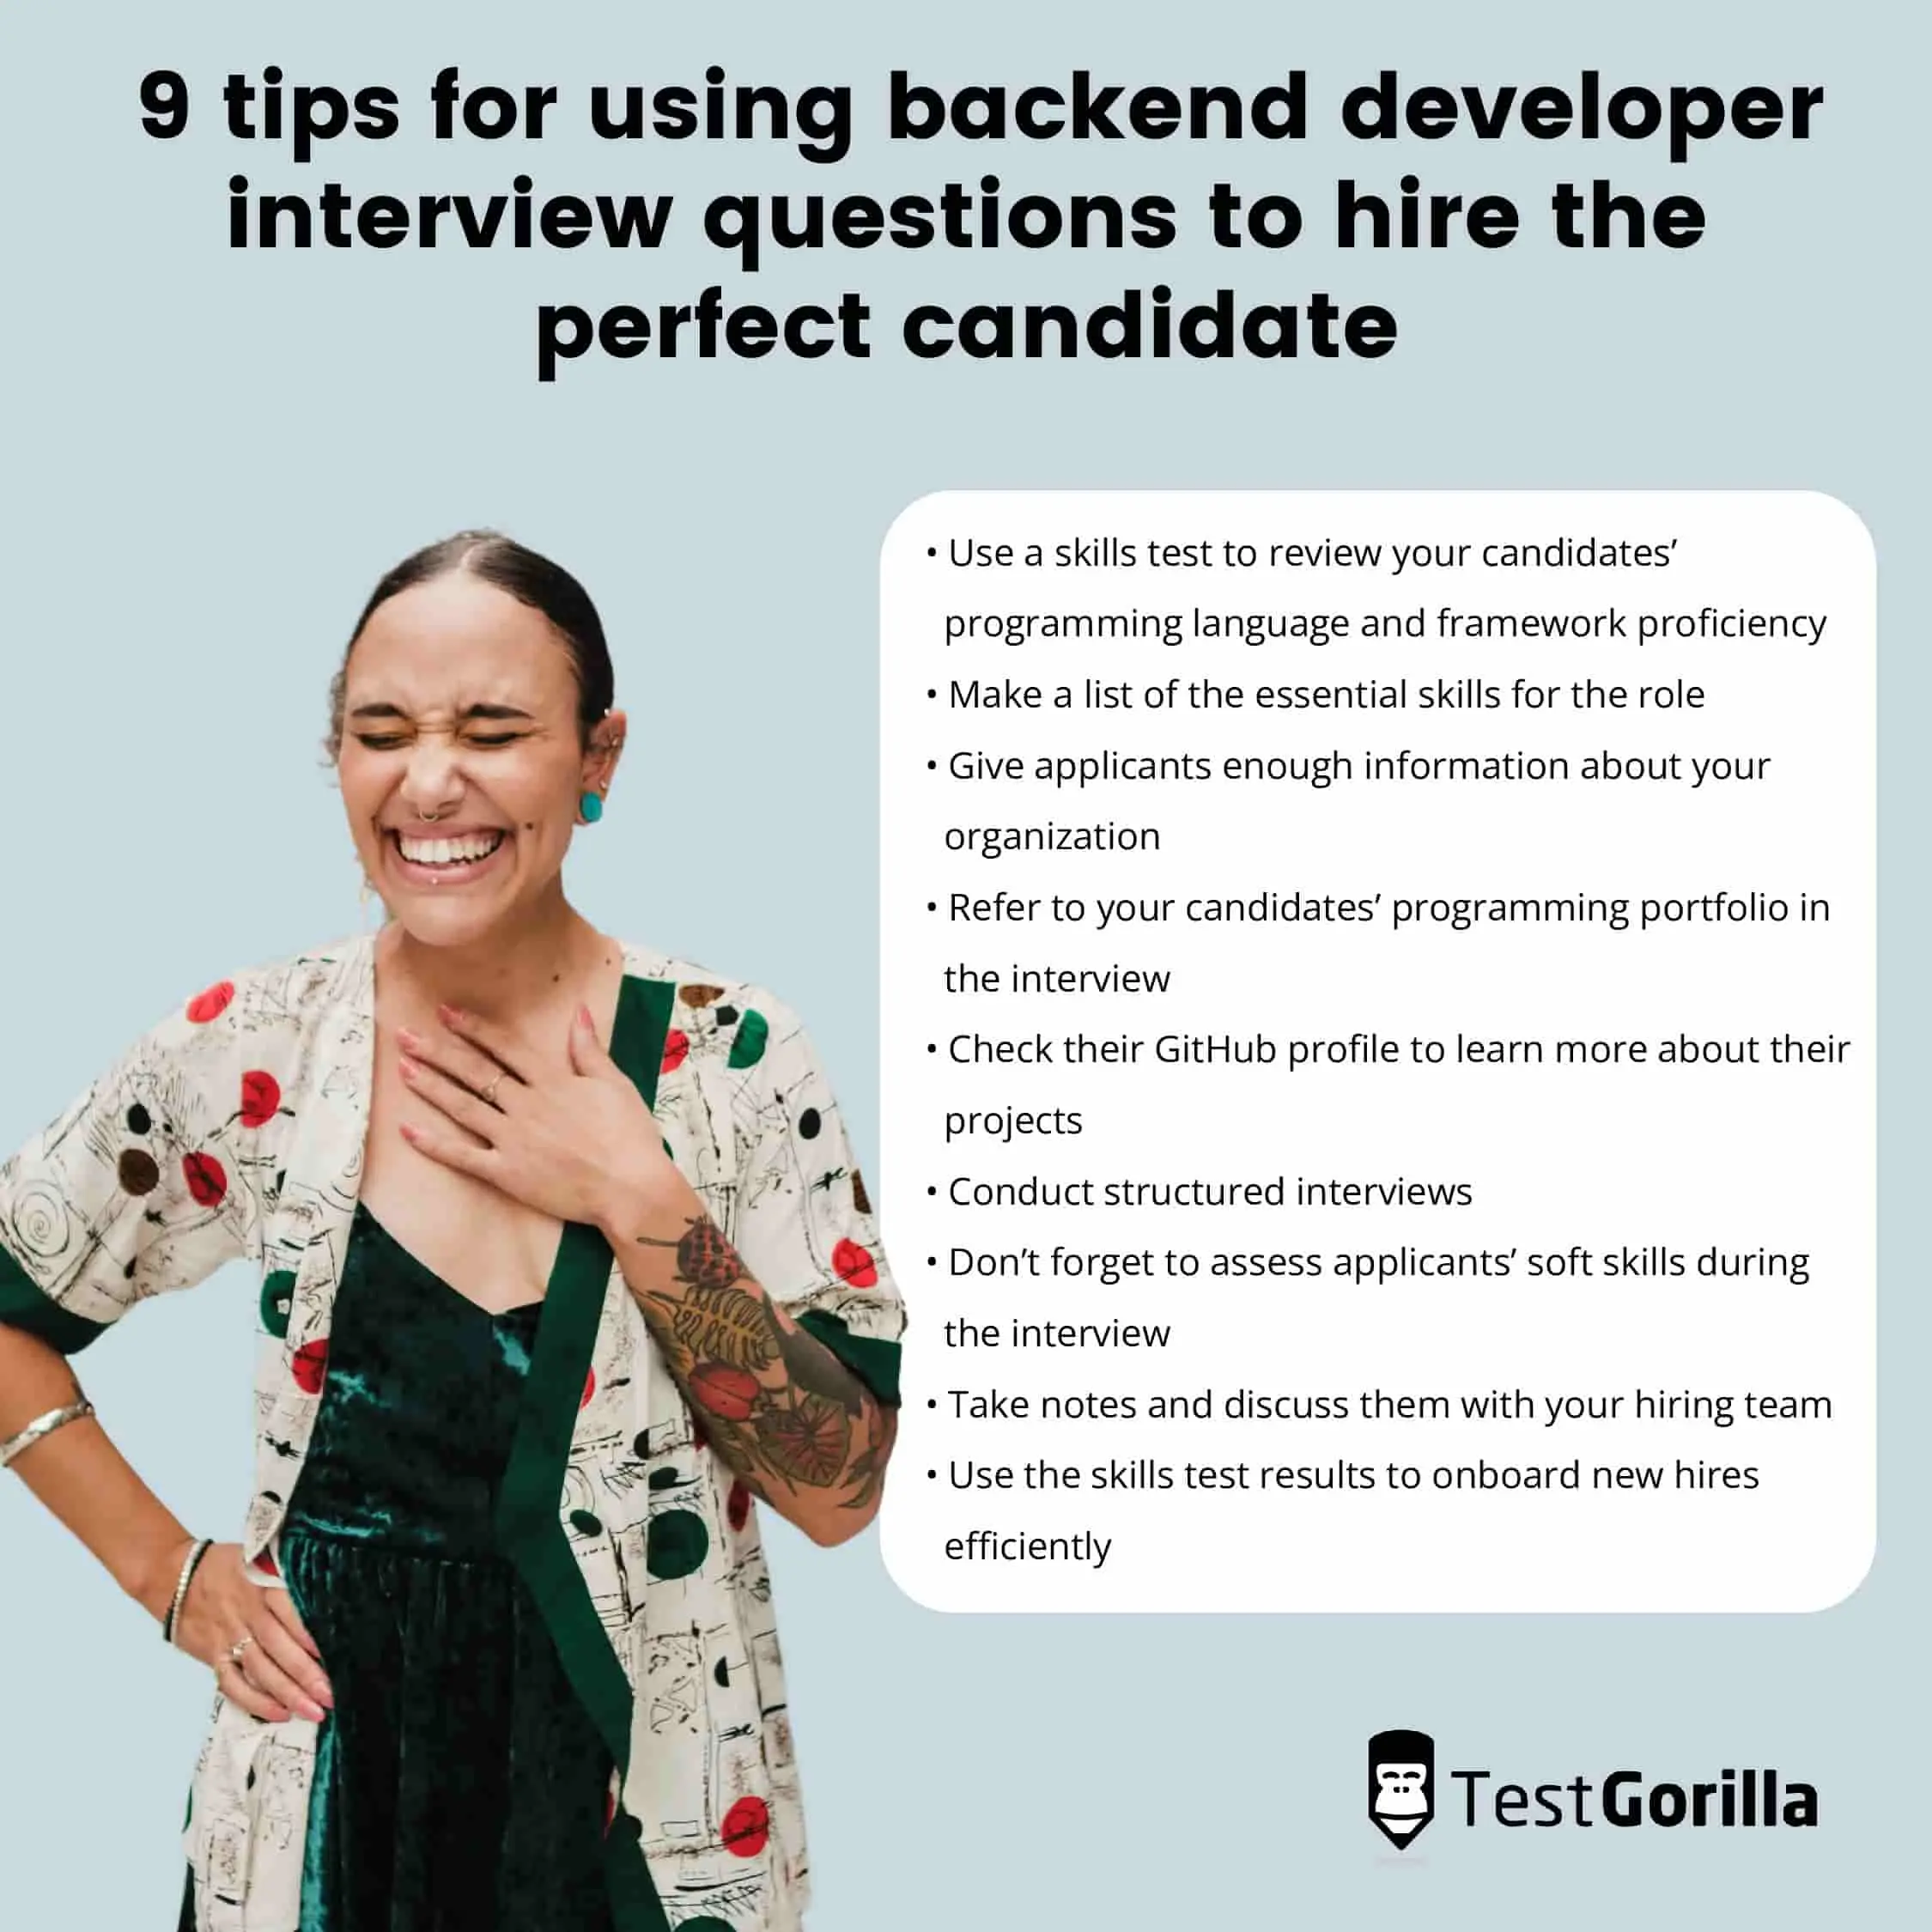 9 tips for using backend developer interview questions to hire the perfect candidate